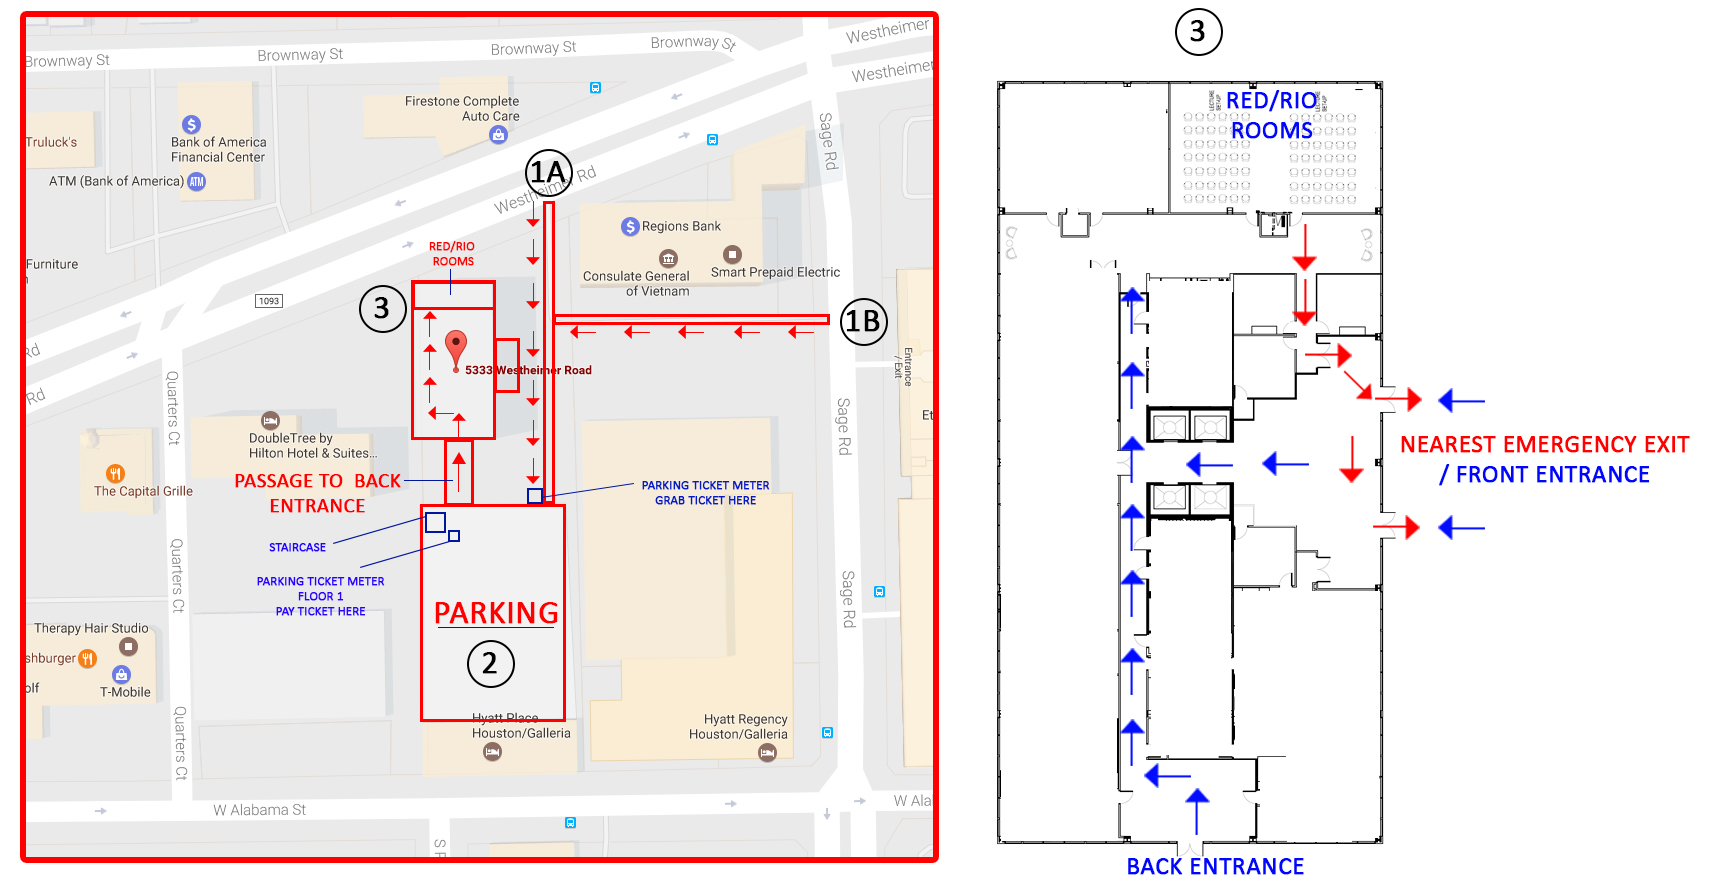 SPE GCS Data Analytics Event 1 - IHS Markit Venue/Parking Directions